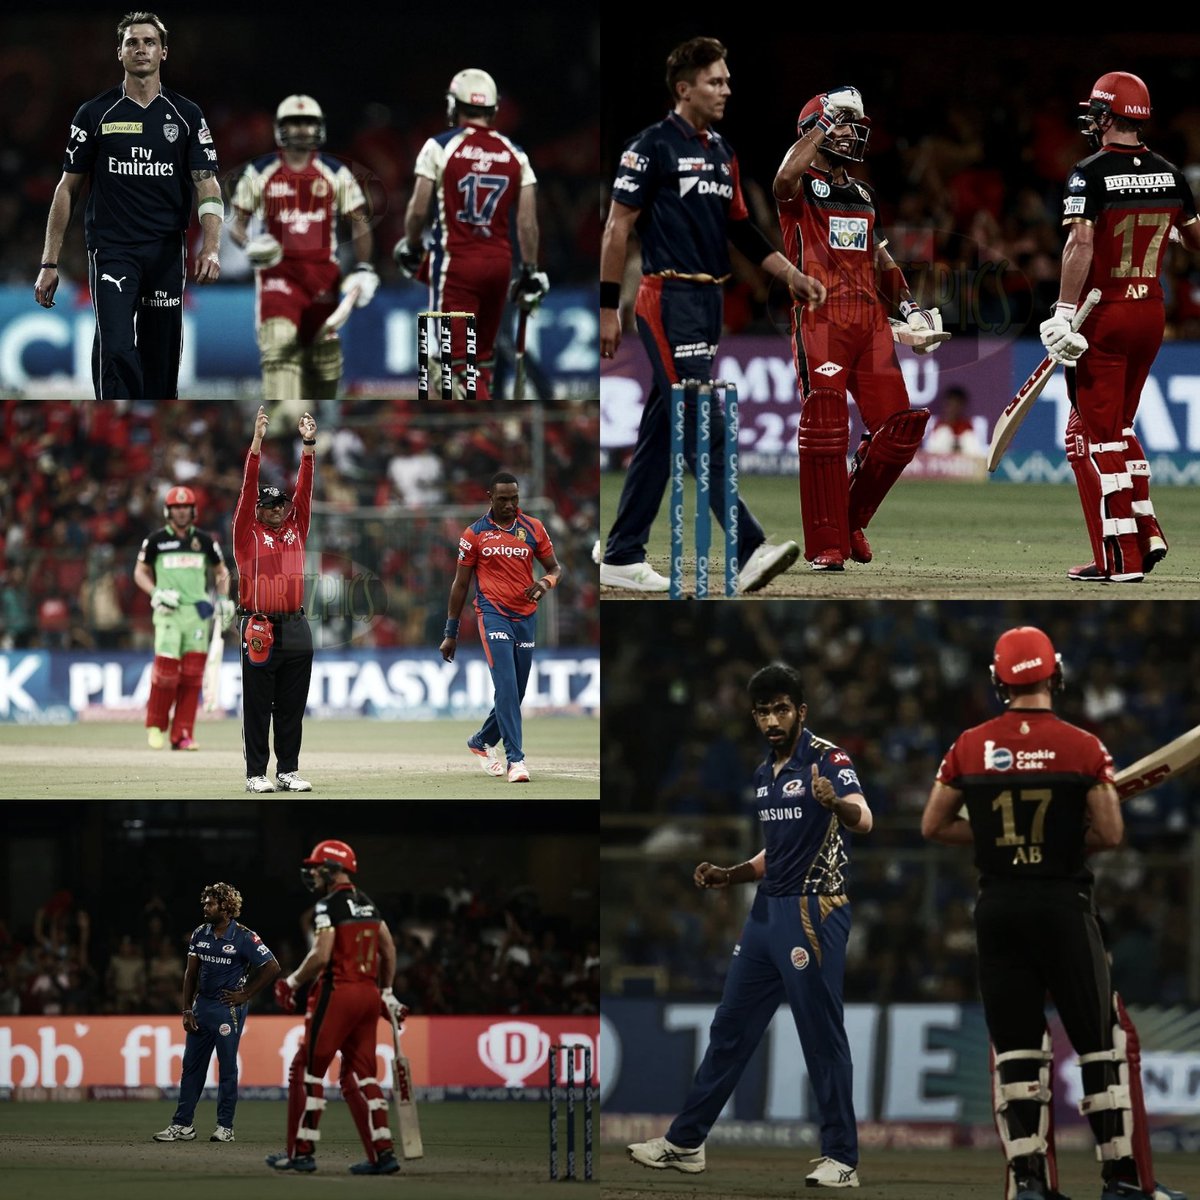 Just two matches RCB lost in the history of IPL when ABD remained not out while chasing.